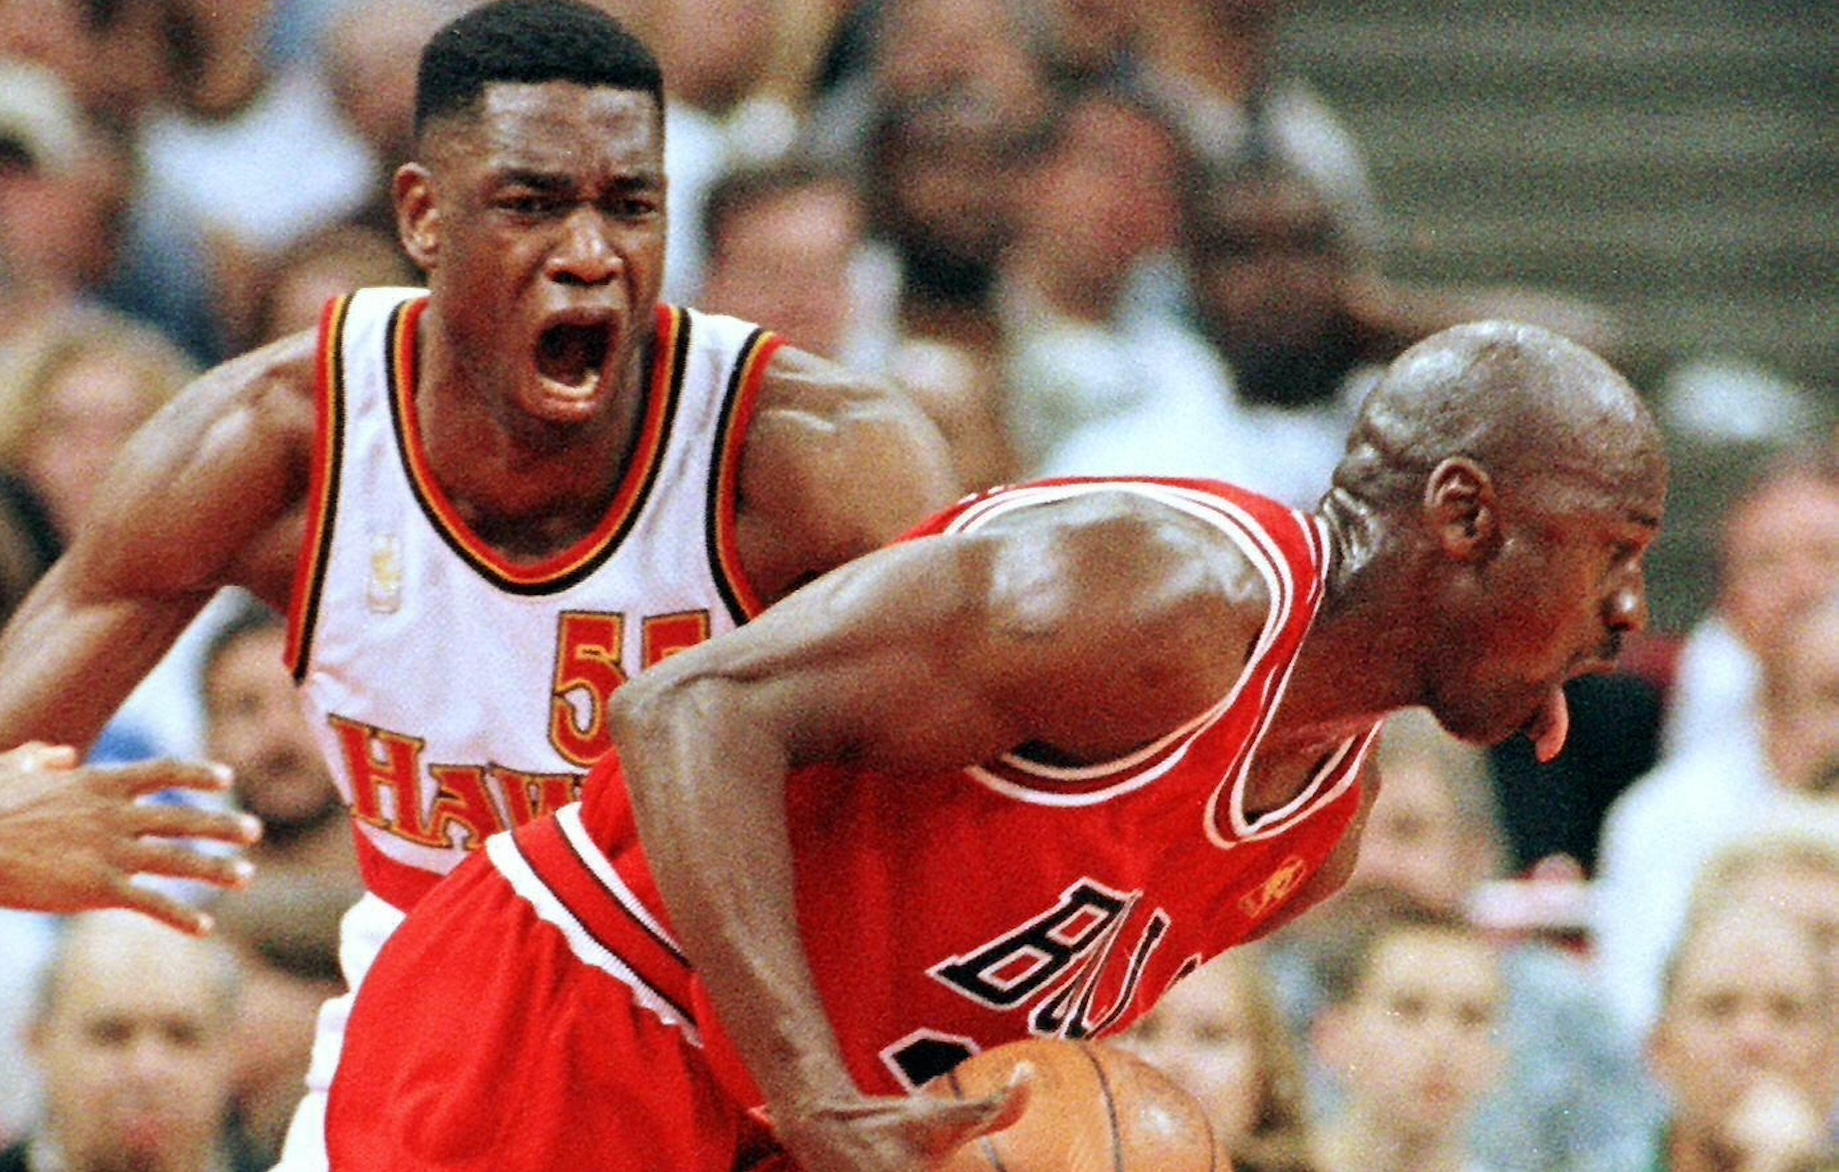 Michael Jordan and Dikembe Mutombo square off during the 1997 NBA playoffs.